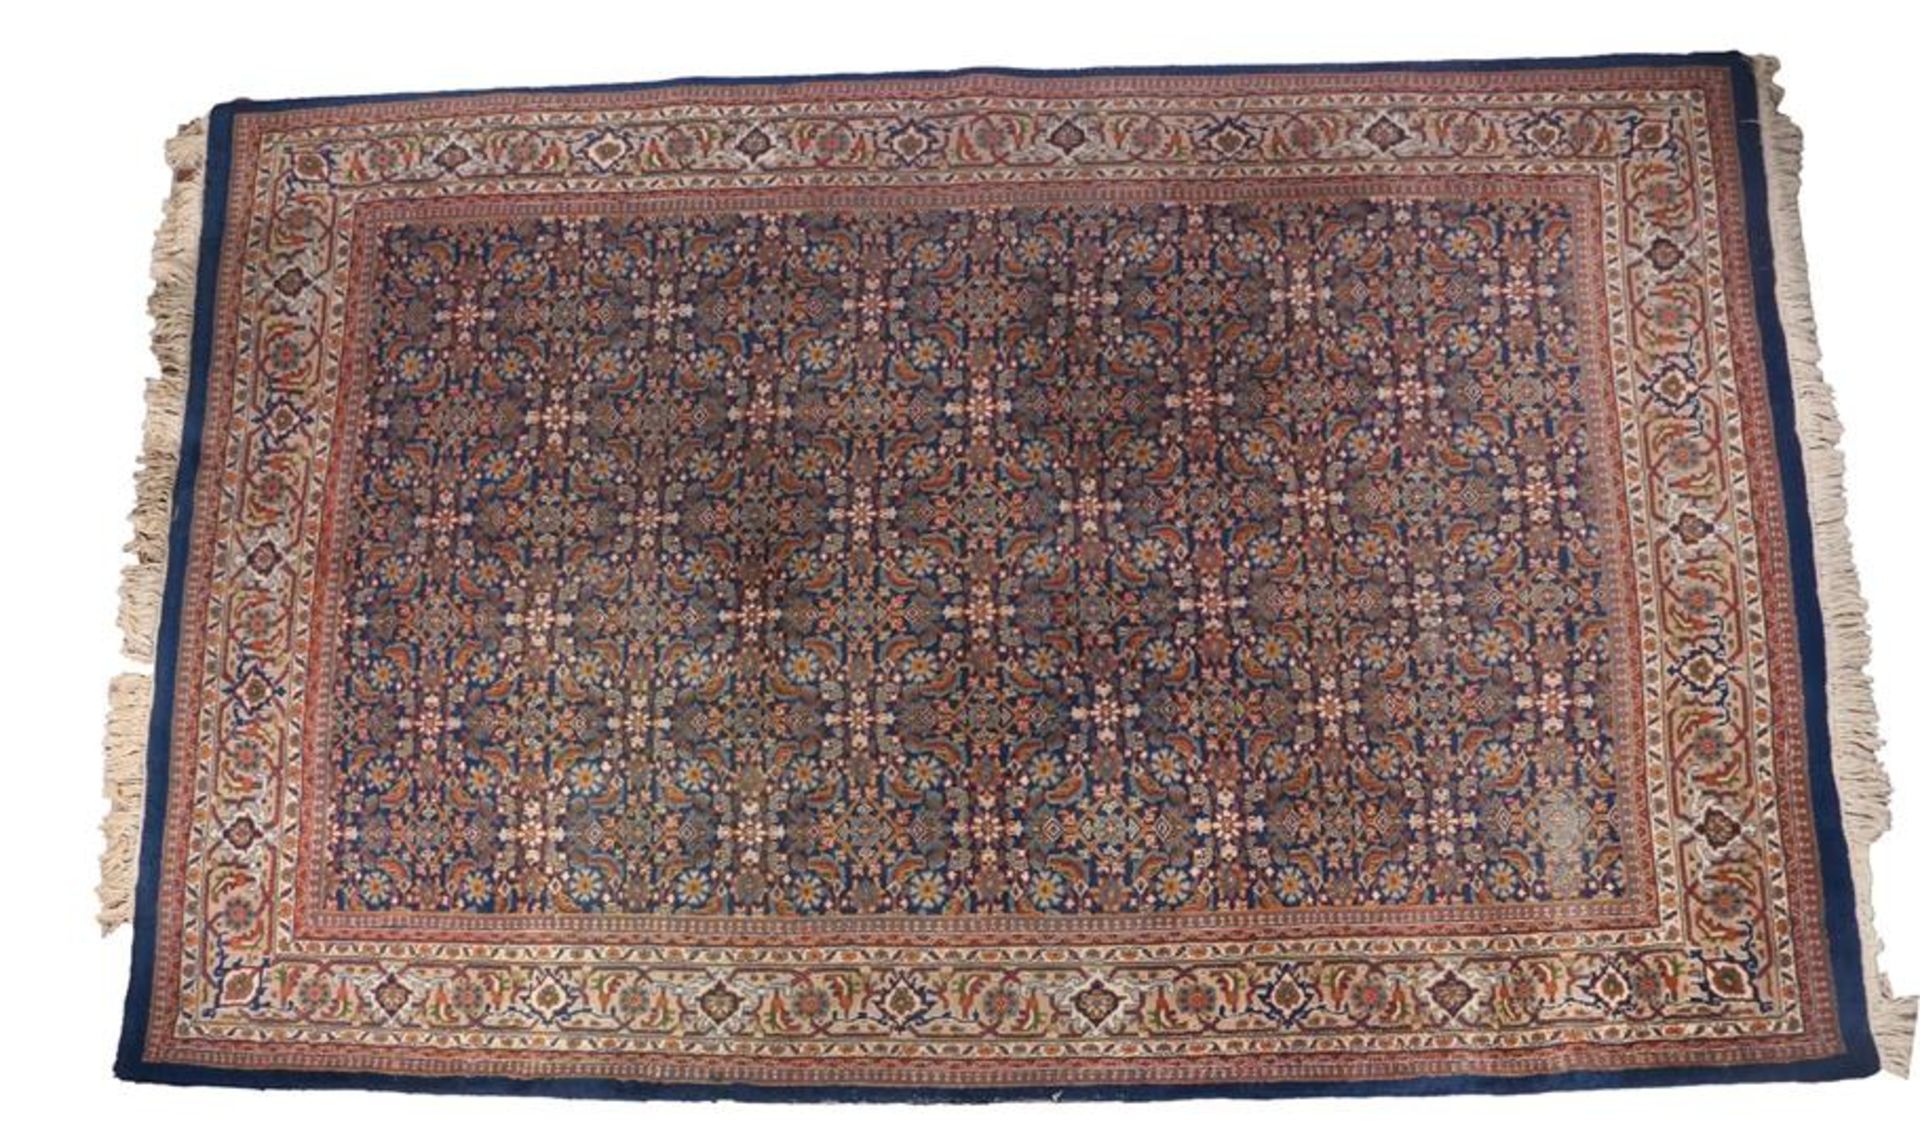 Oriental hand-knotted wool carpet, 316x223 cm